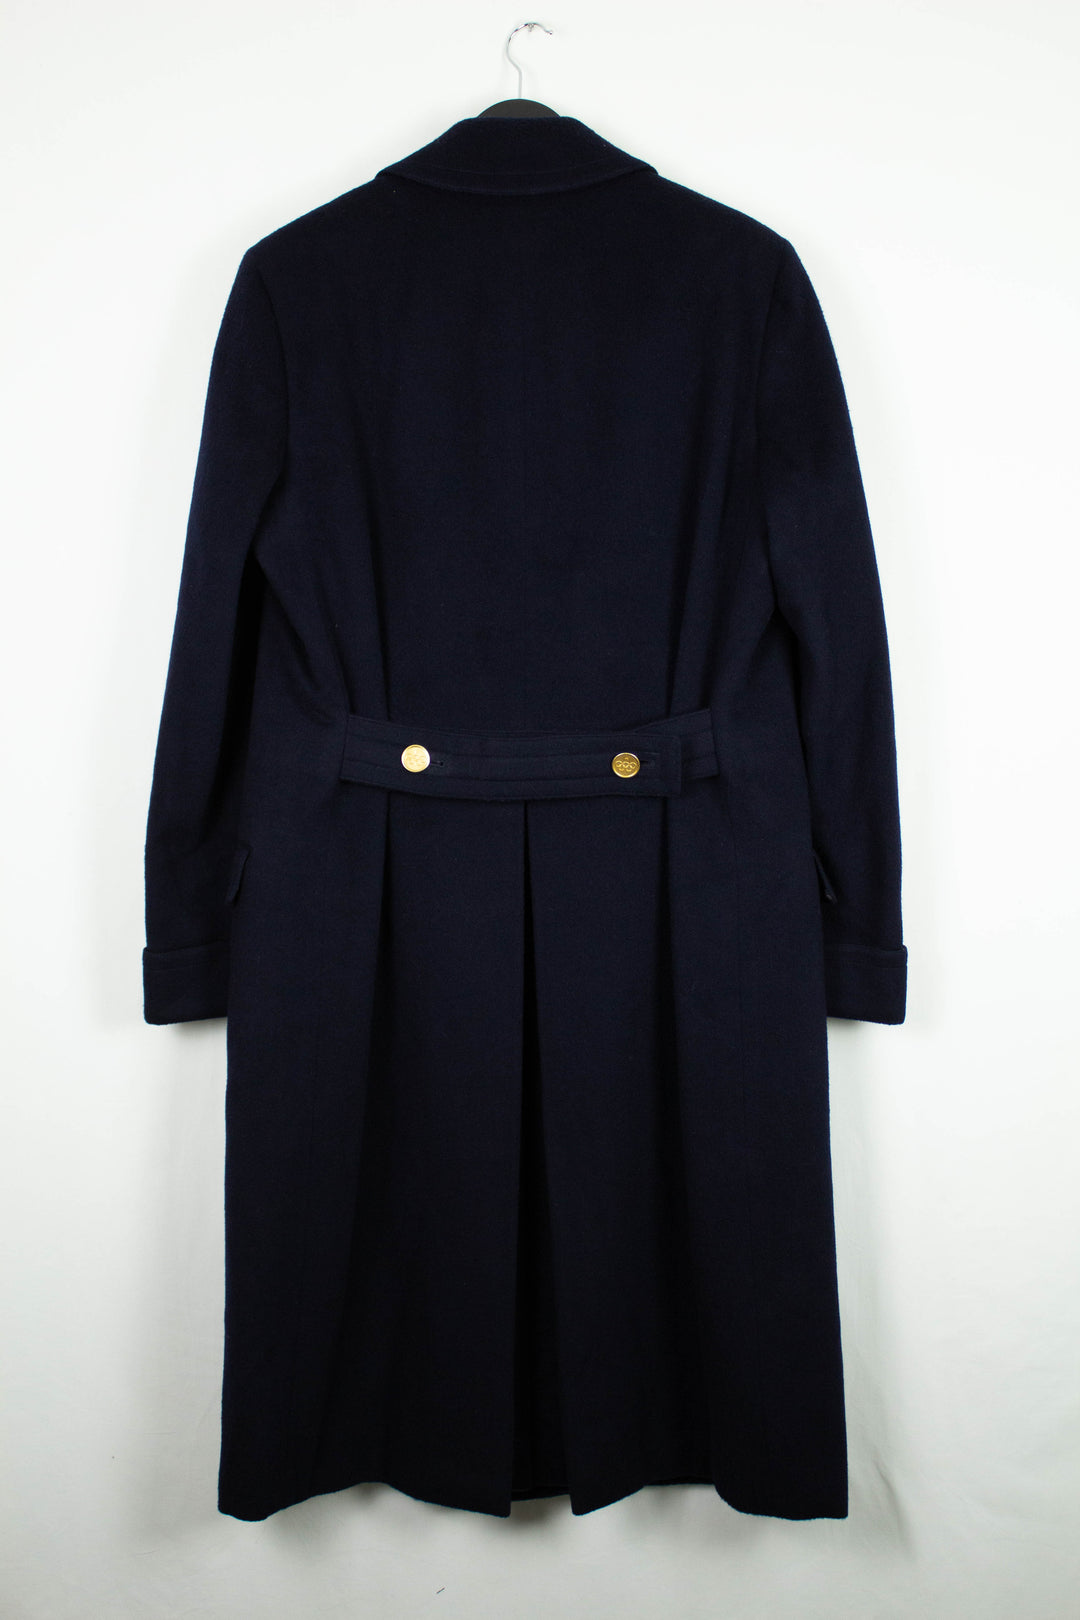 Valentino navy wool coat - Olympic Edition - 52 Large